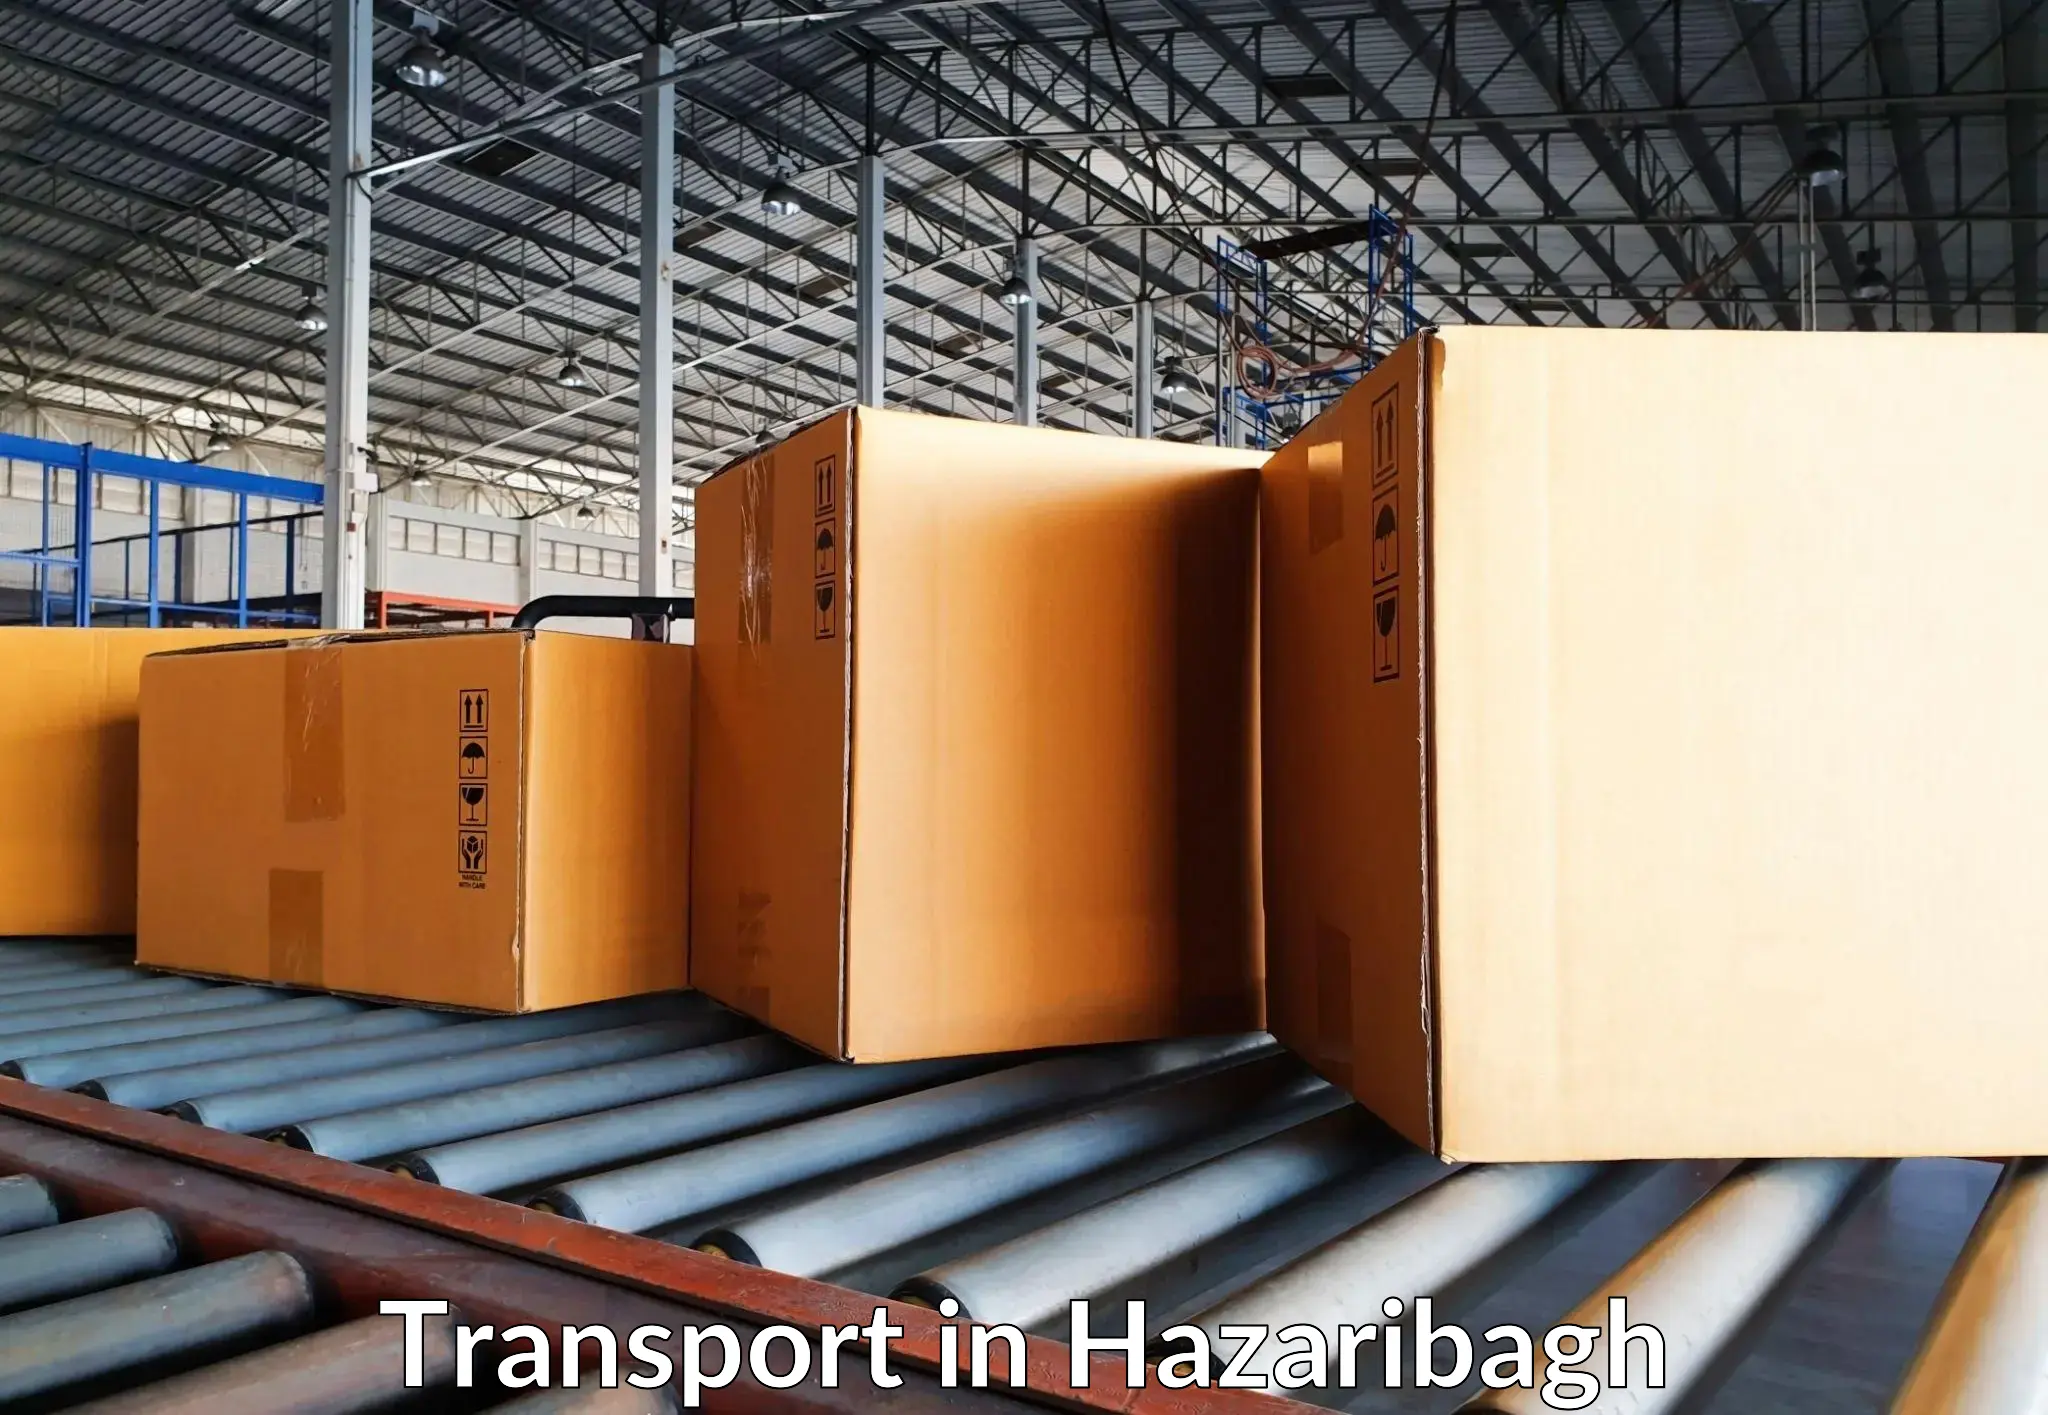 Air freight transport services in Hazaribagh